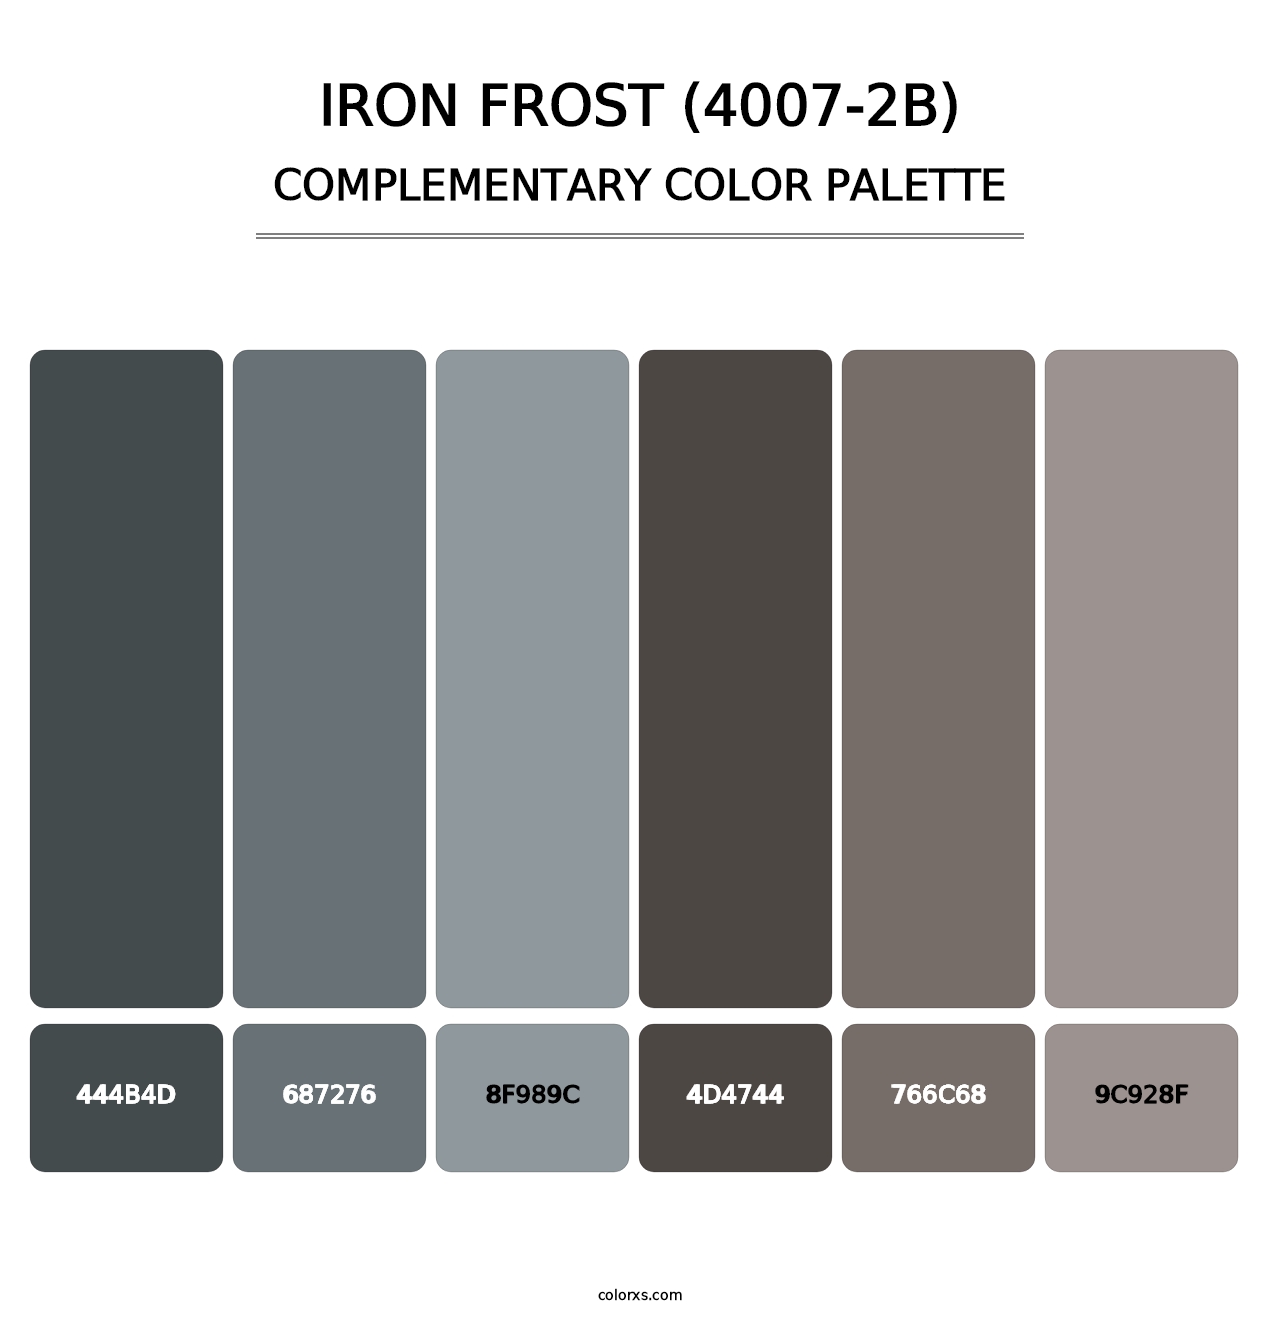 Iron Frost (4007-2B) - Complementary Color Palette